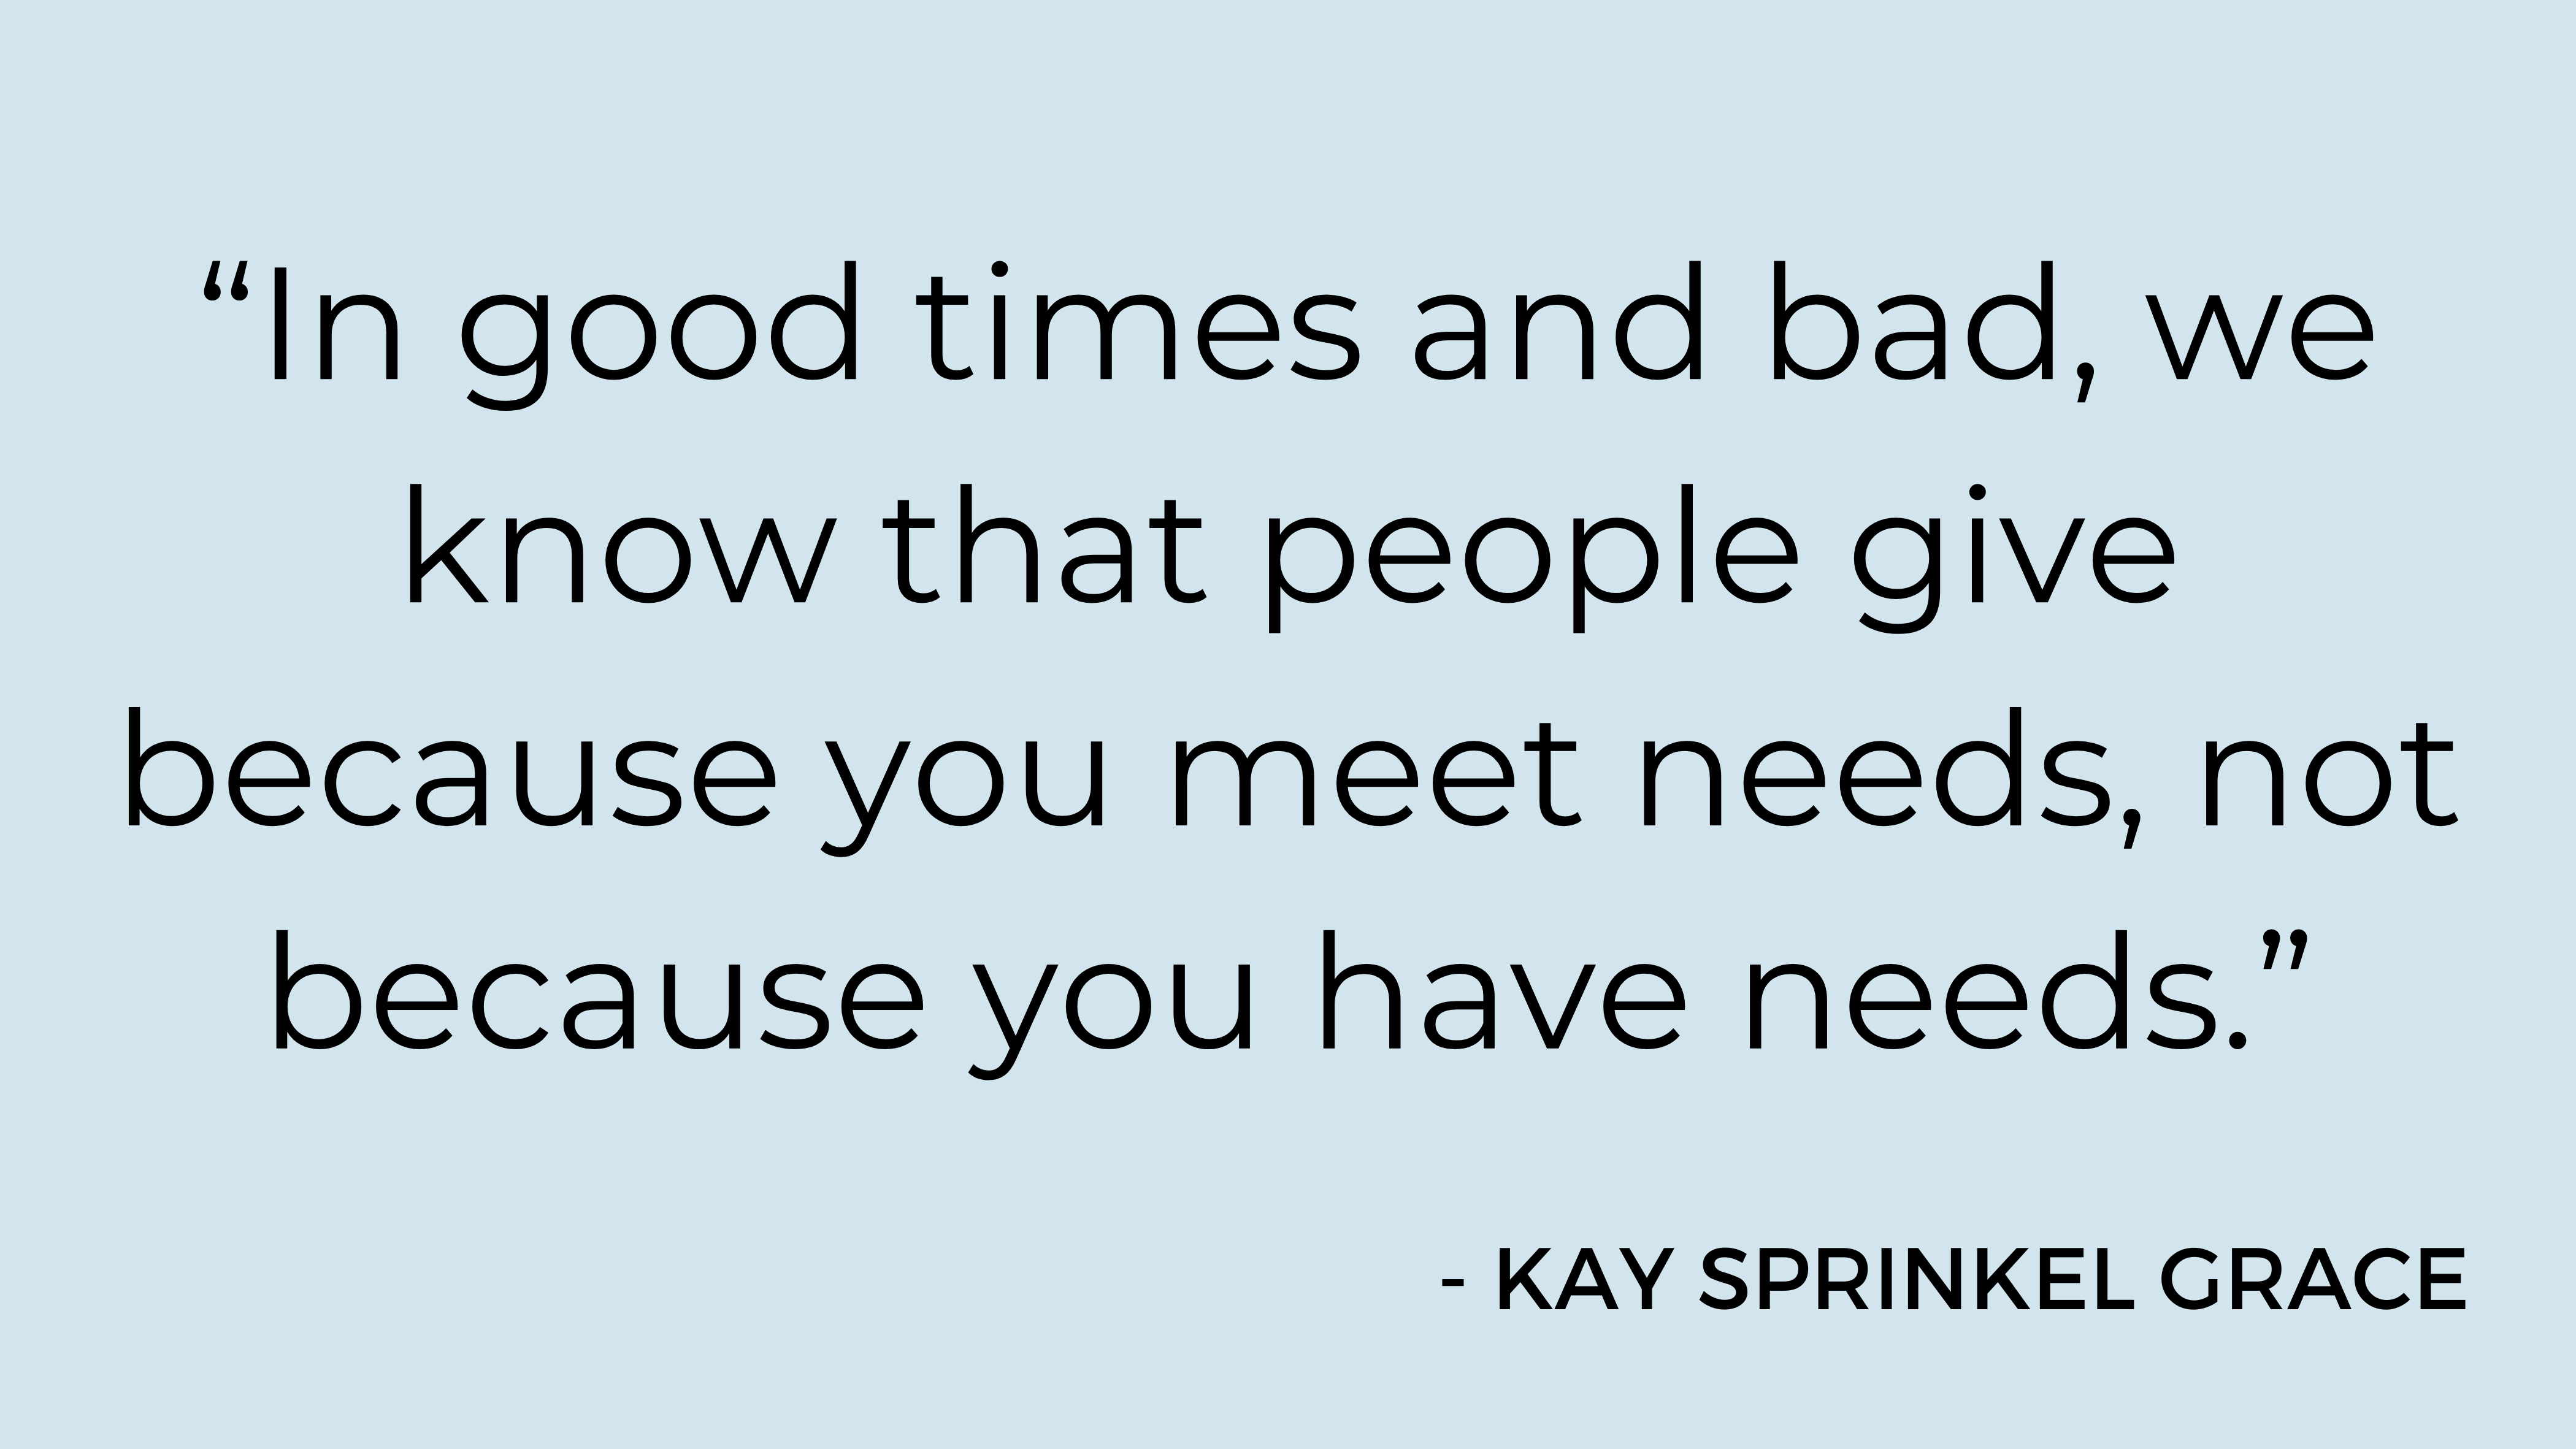 "In good times and bad, we know that people give because you meet needs, not because you have needs." - Kay Sprinkel Grace